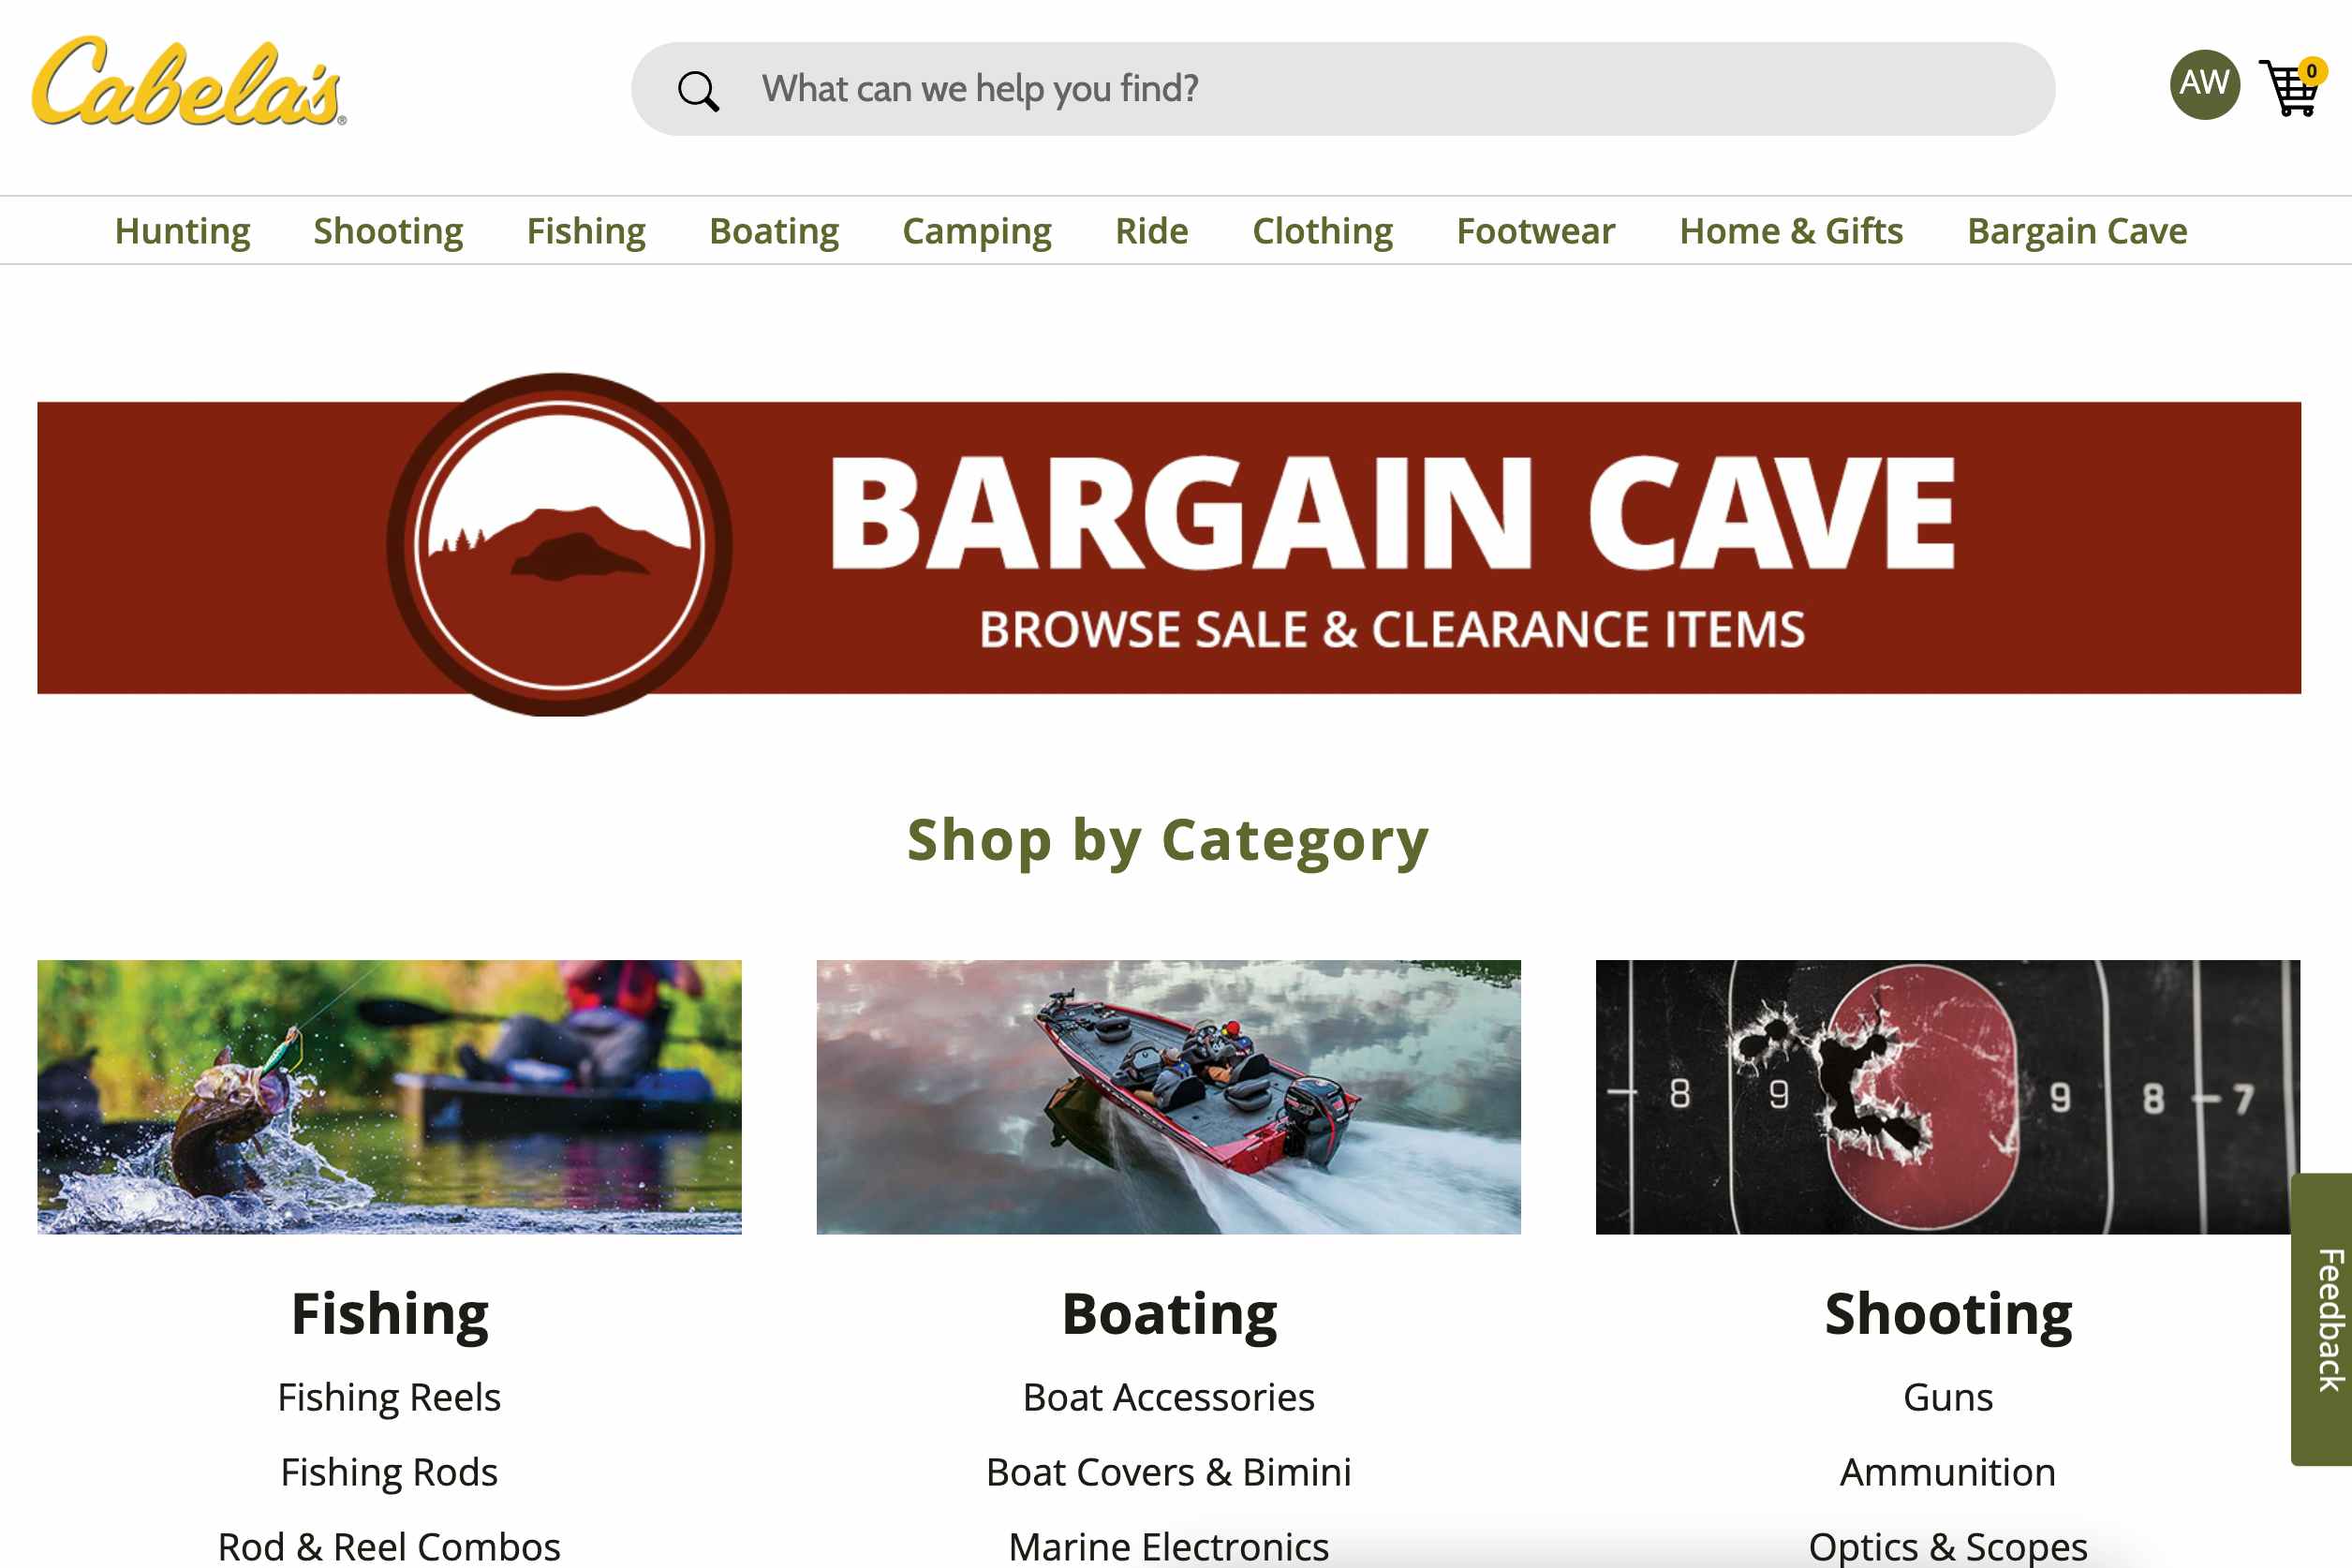 A screenshot of the Cabela's Bargain Cave webpage.